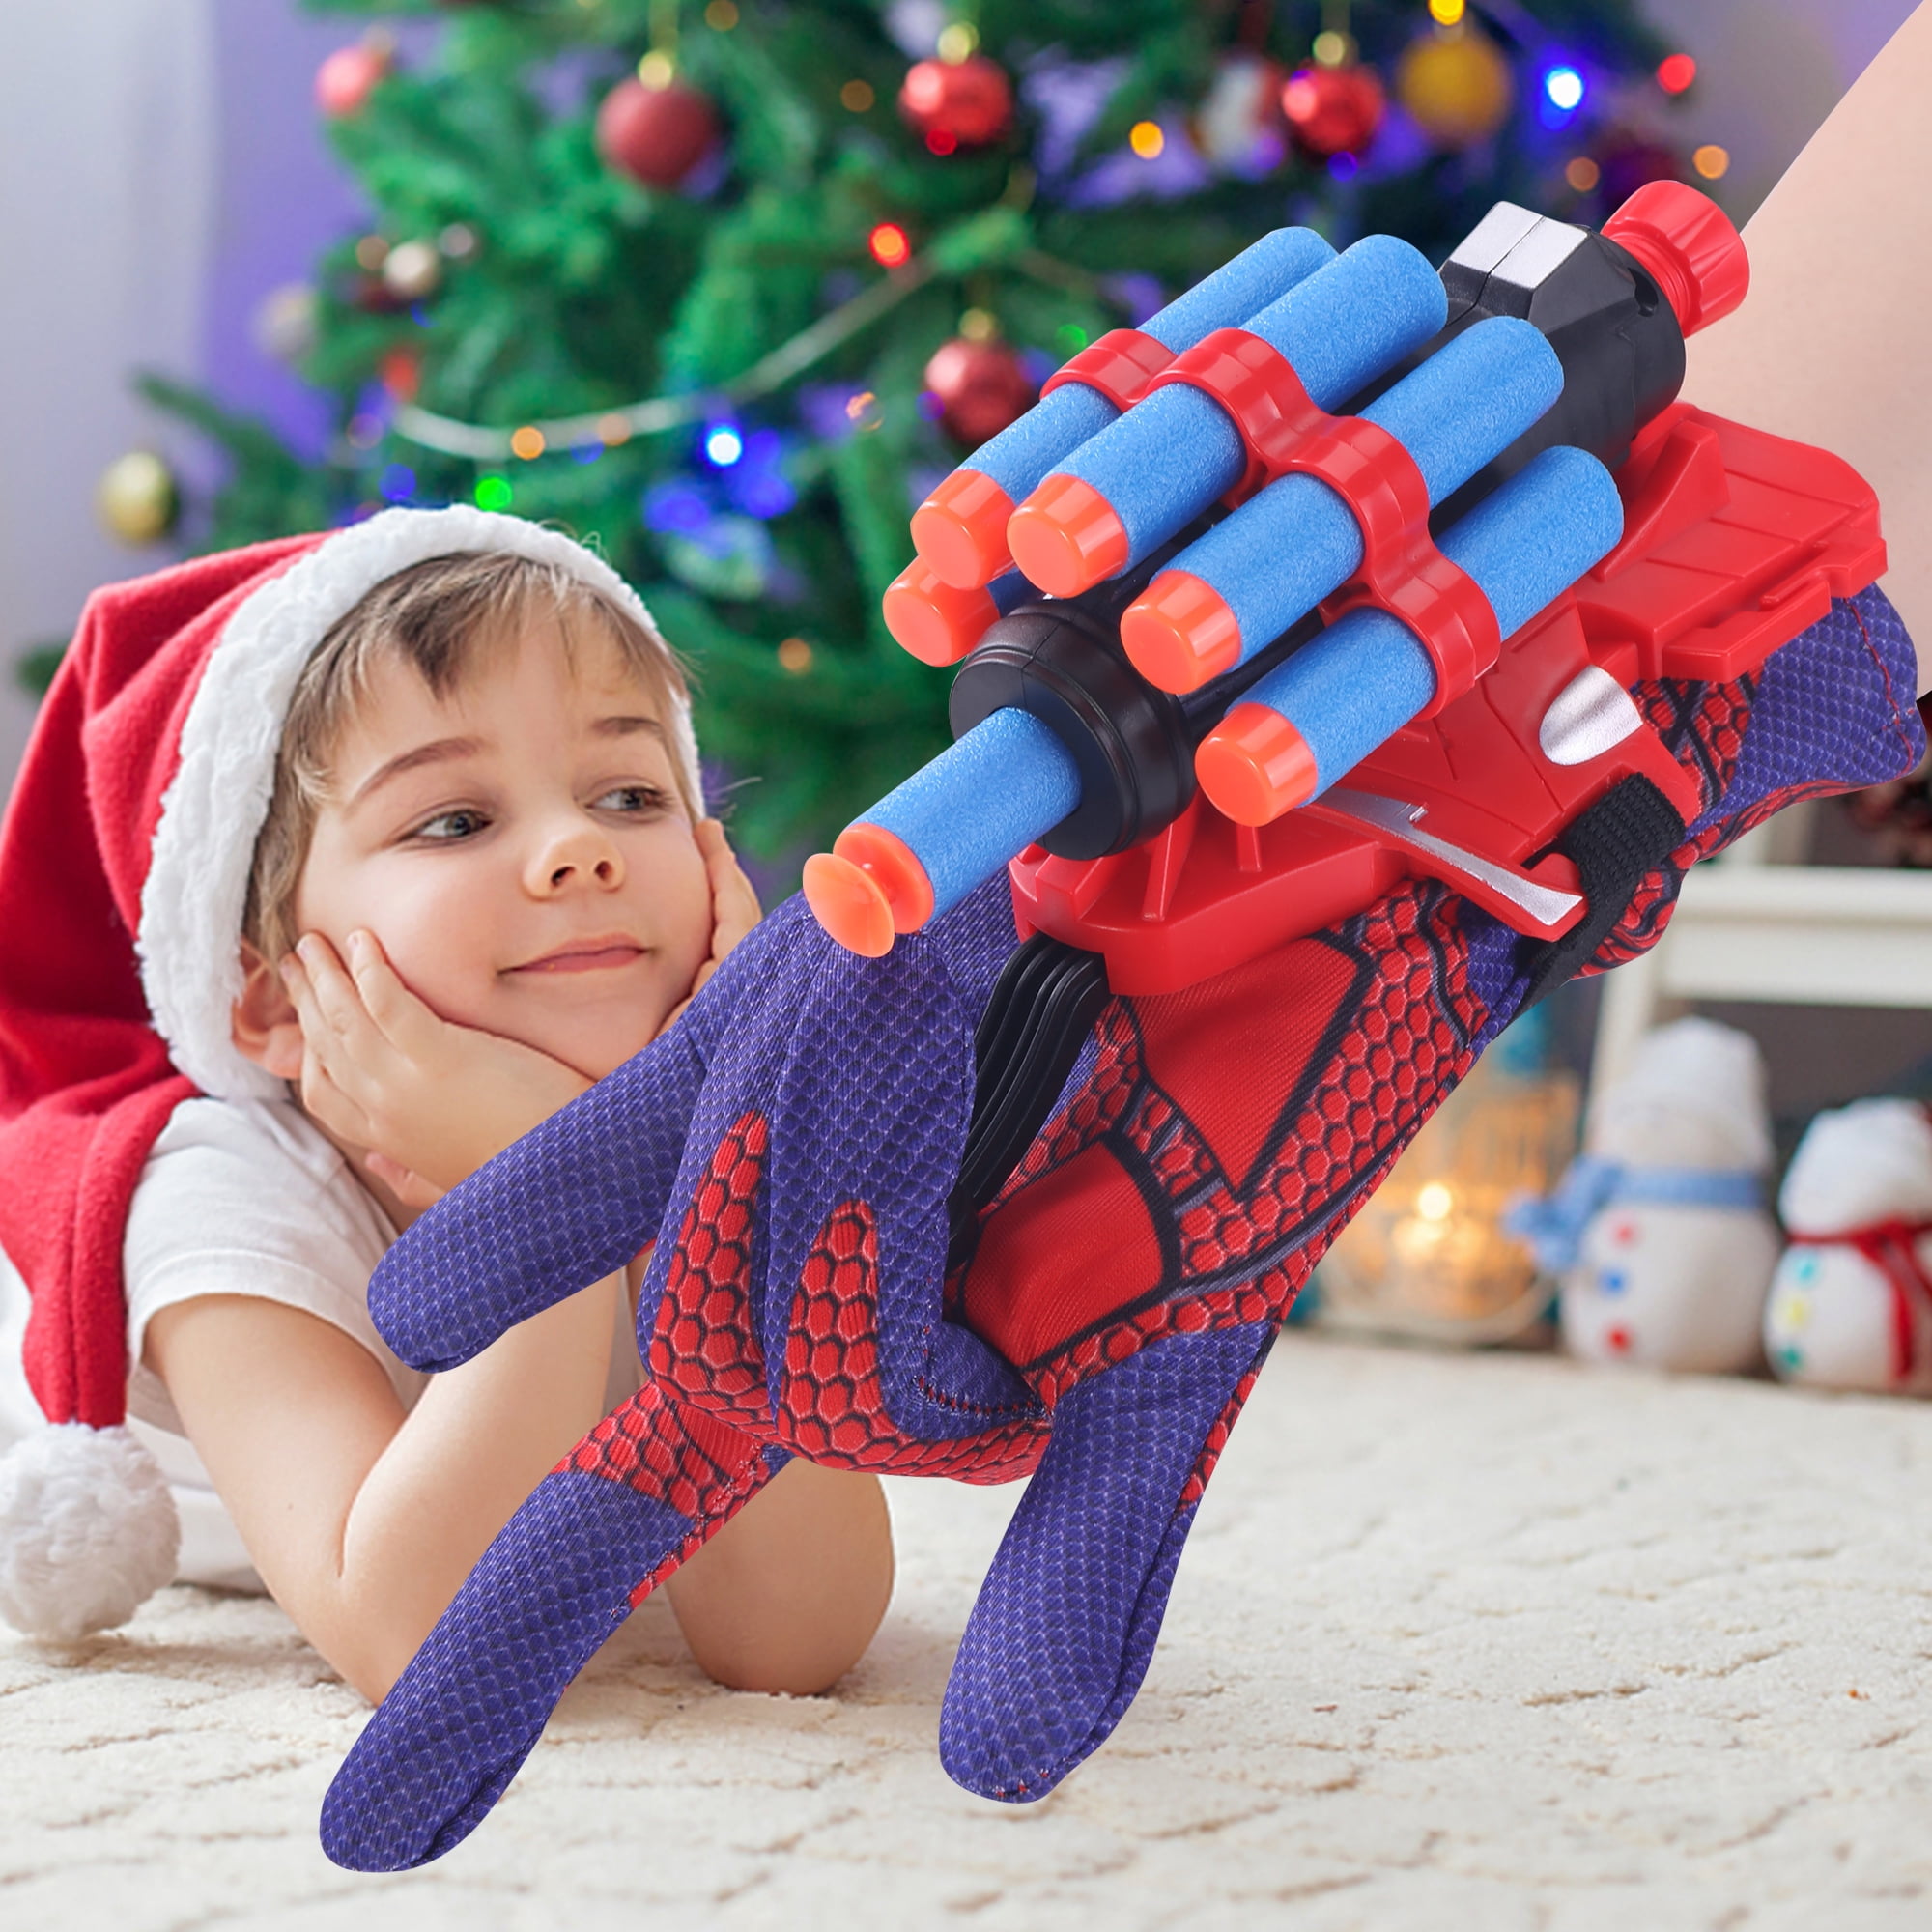 Shooter Toy for Kids, Kids Plastic Cosplay Launcher Glove Launcher